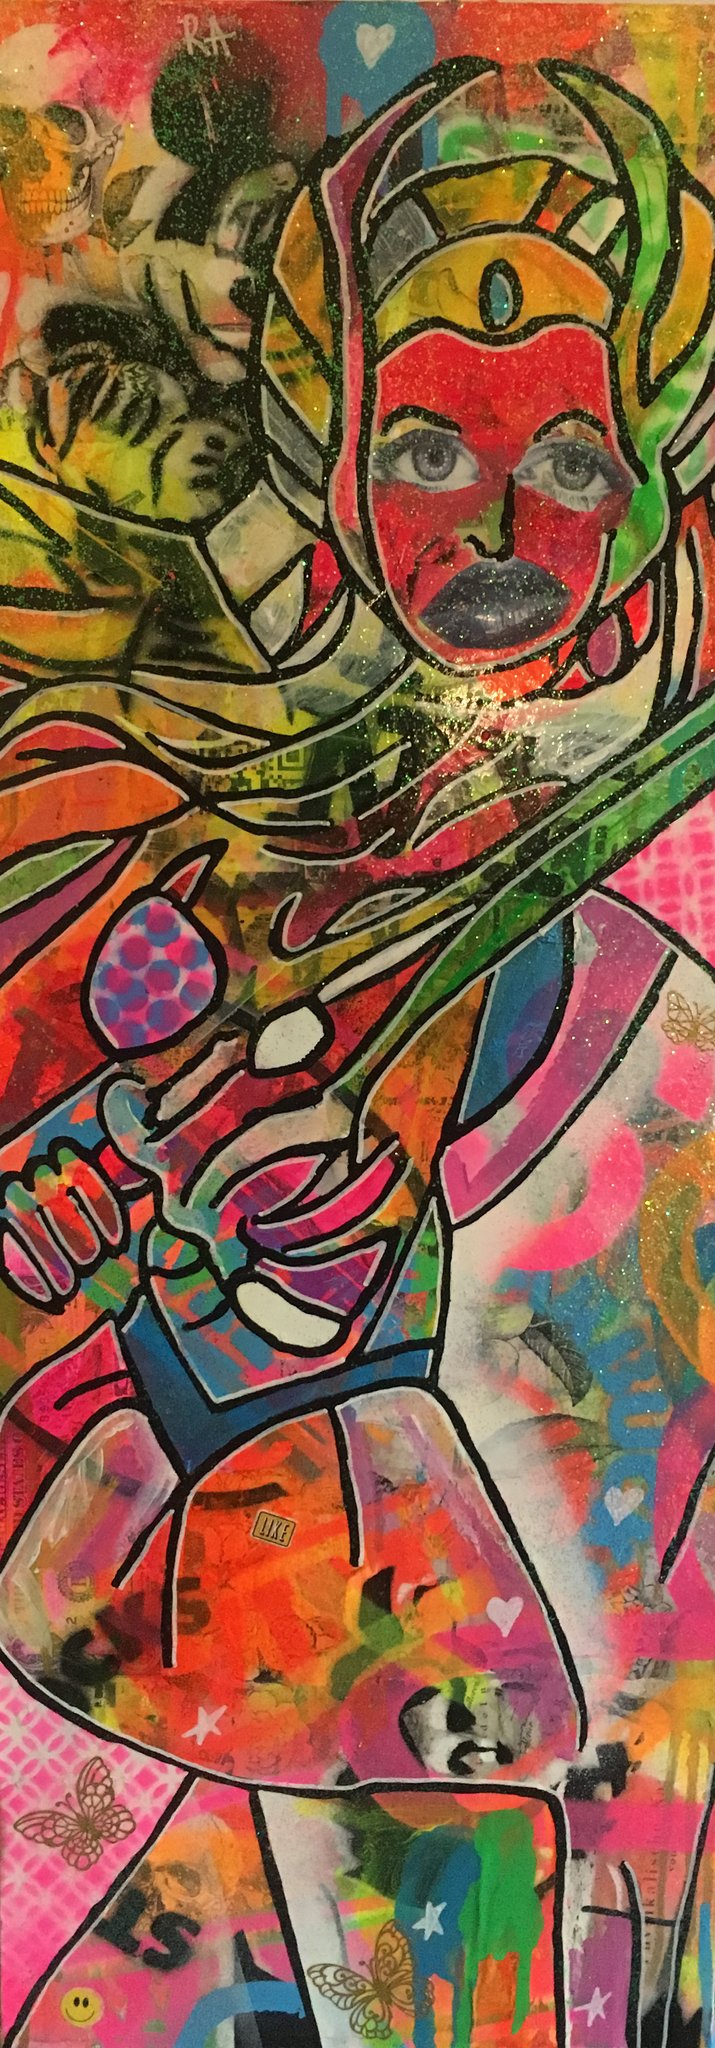 Peace Sword by Barrie J Davies 2017, Mixed media on canvas, 30cm x 80cm, unframed. Barrie J Davies is an Artist - Pop Art and Street art inspired Artist based in Brighton England UK - Pop Art Paintings, Street Art Prints & Editions available.